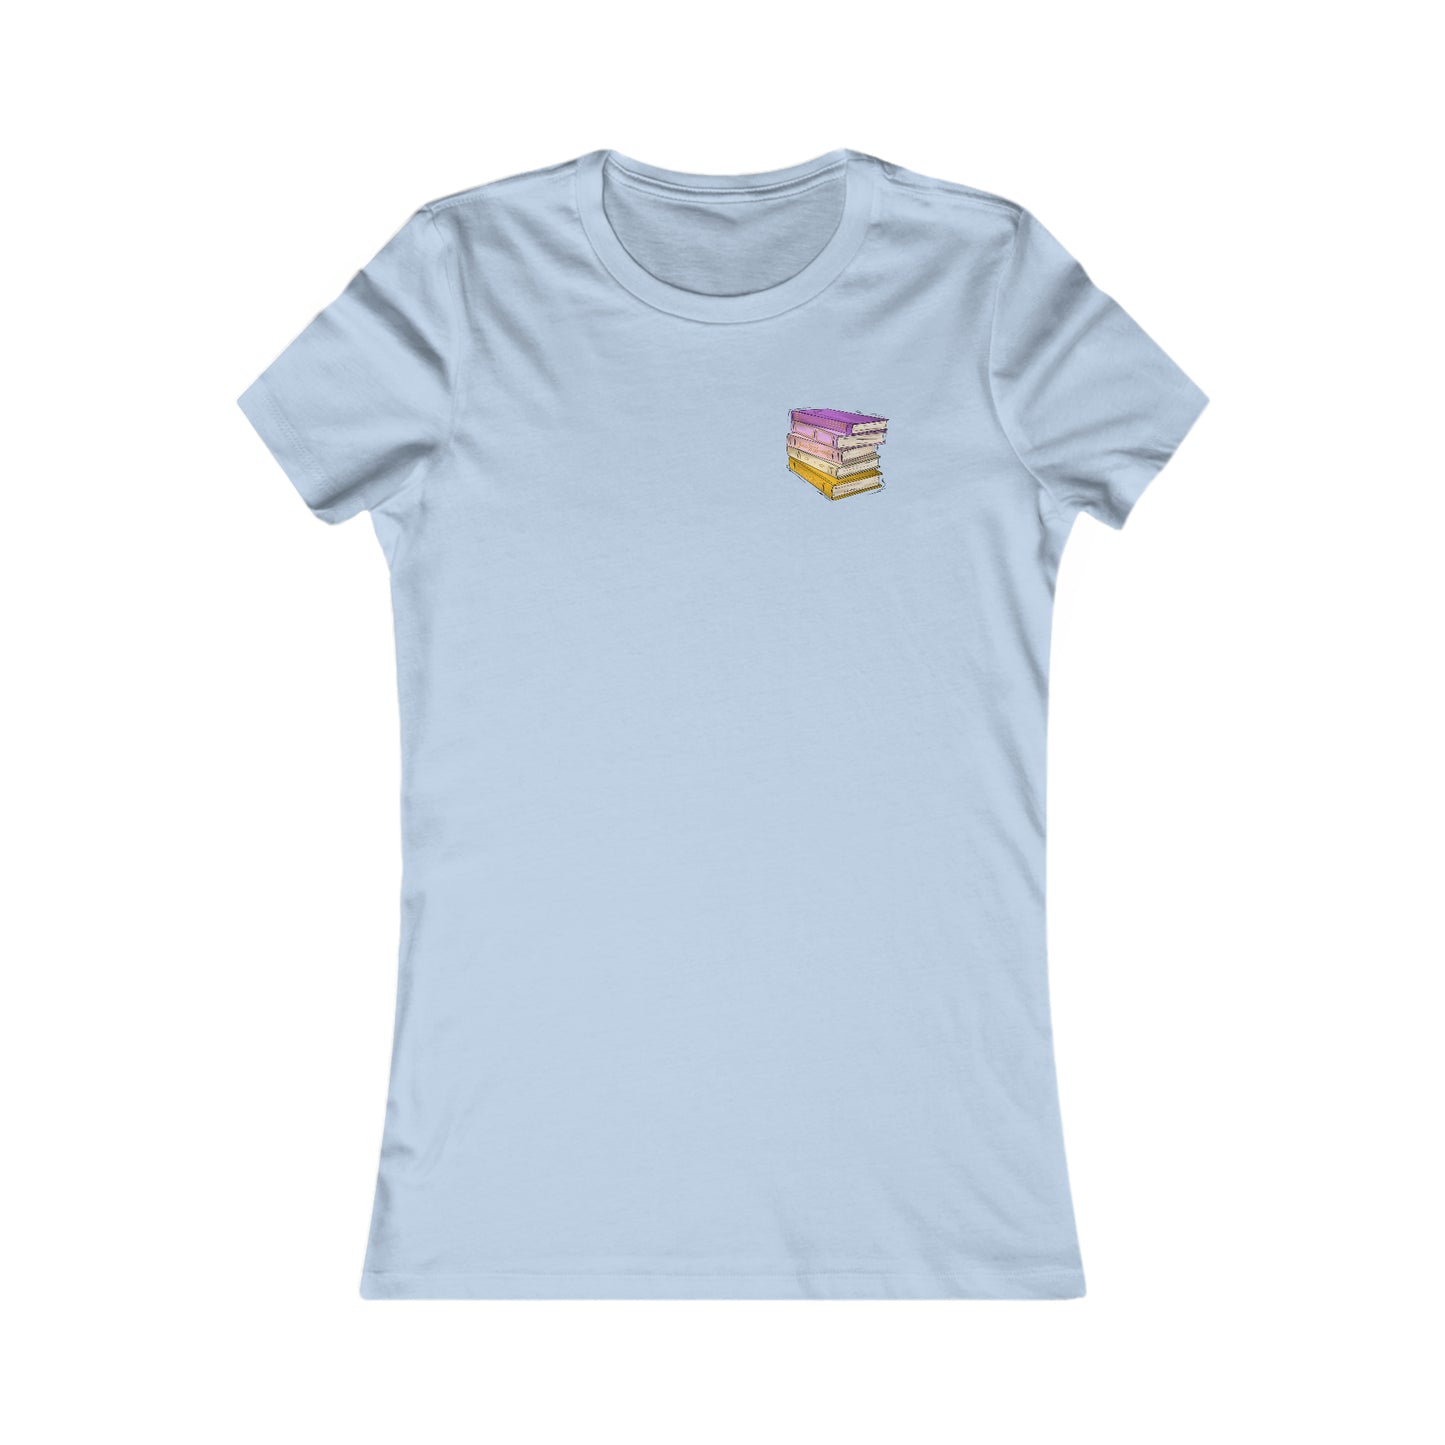 Trixic Pride Flag Old Books - Women's T-Shirt